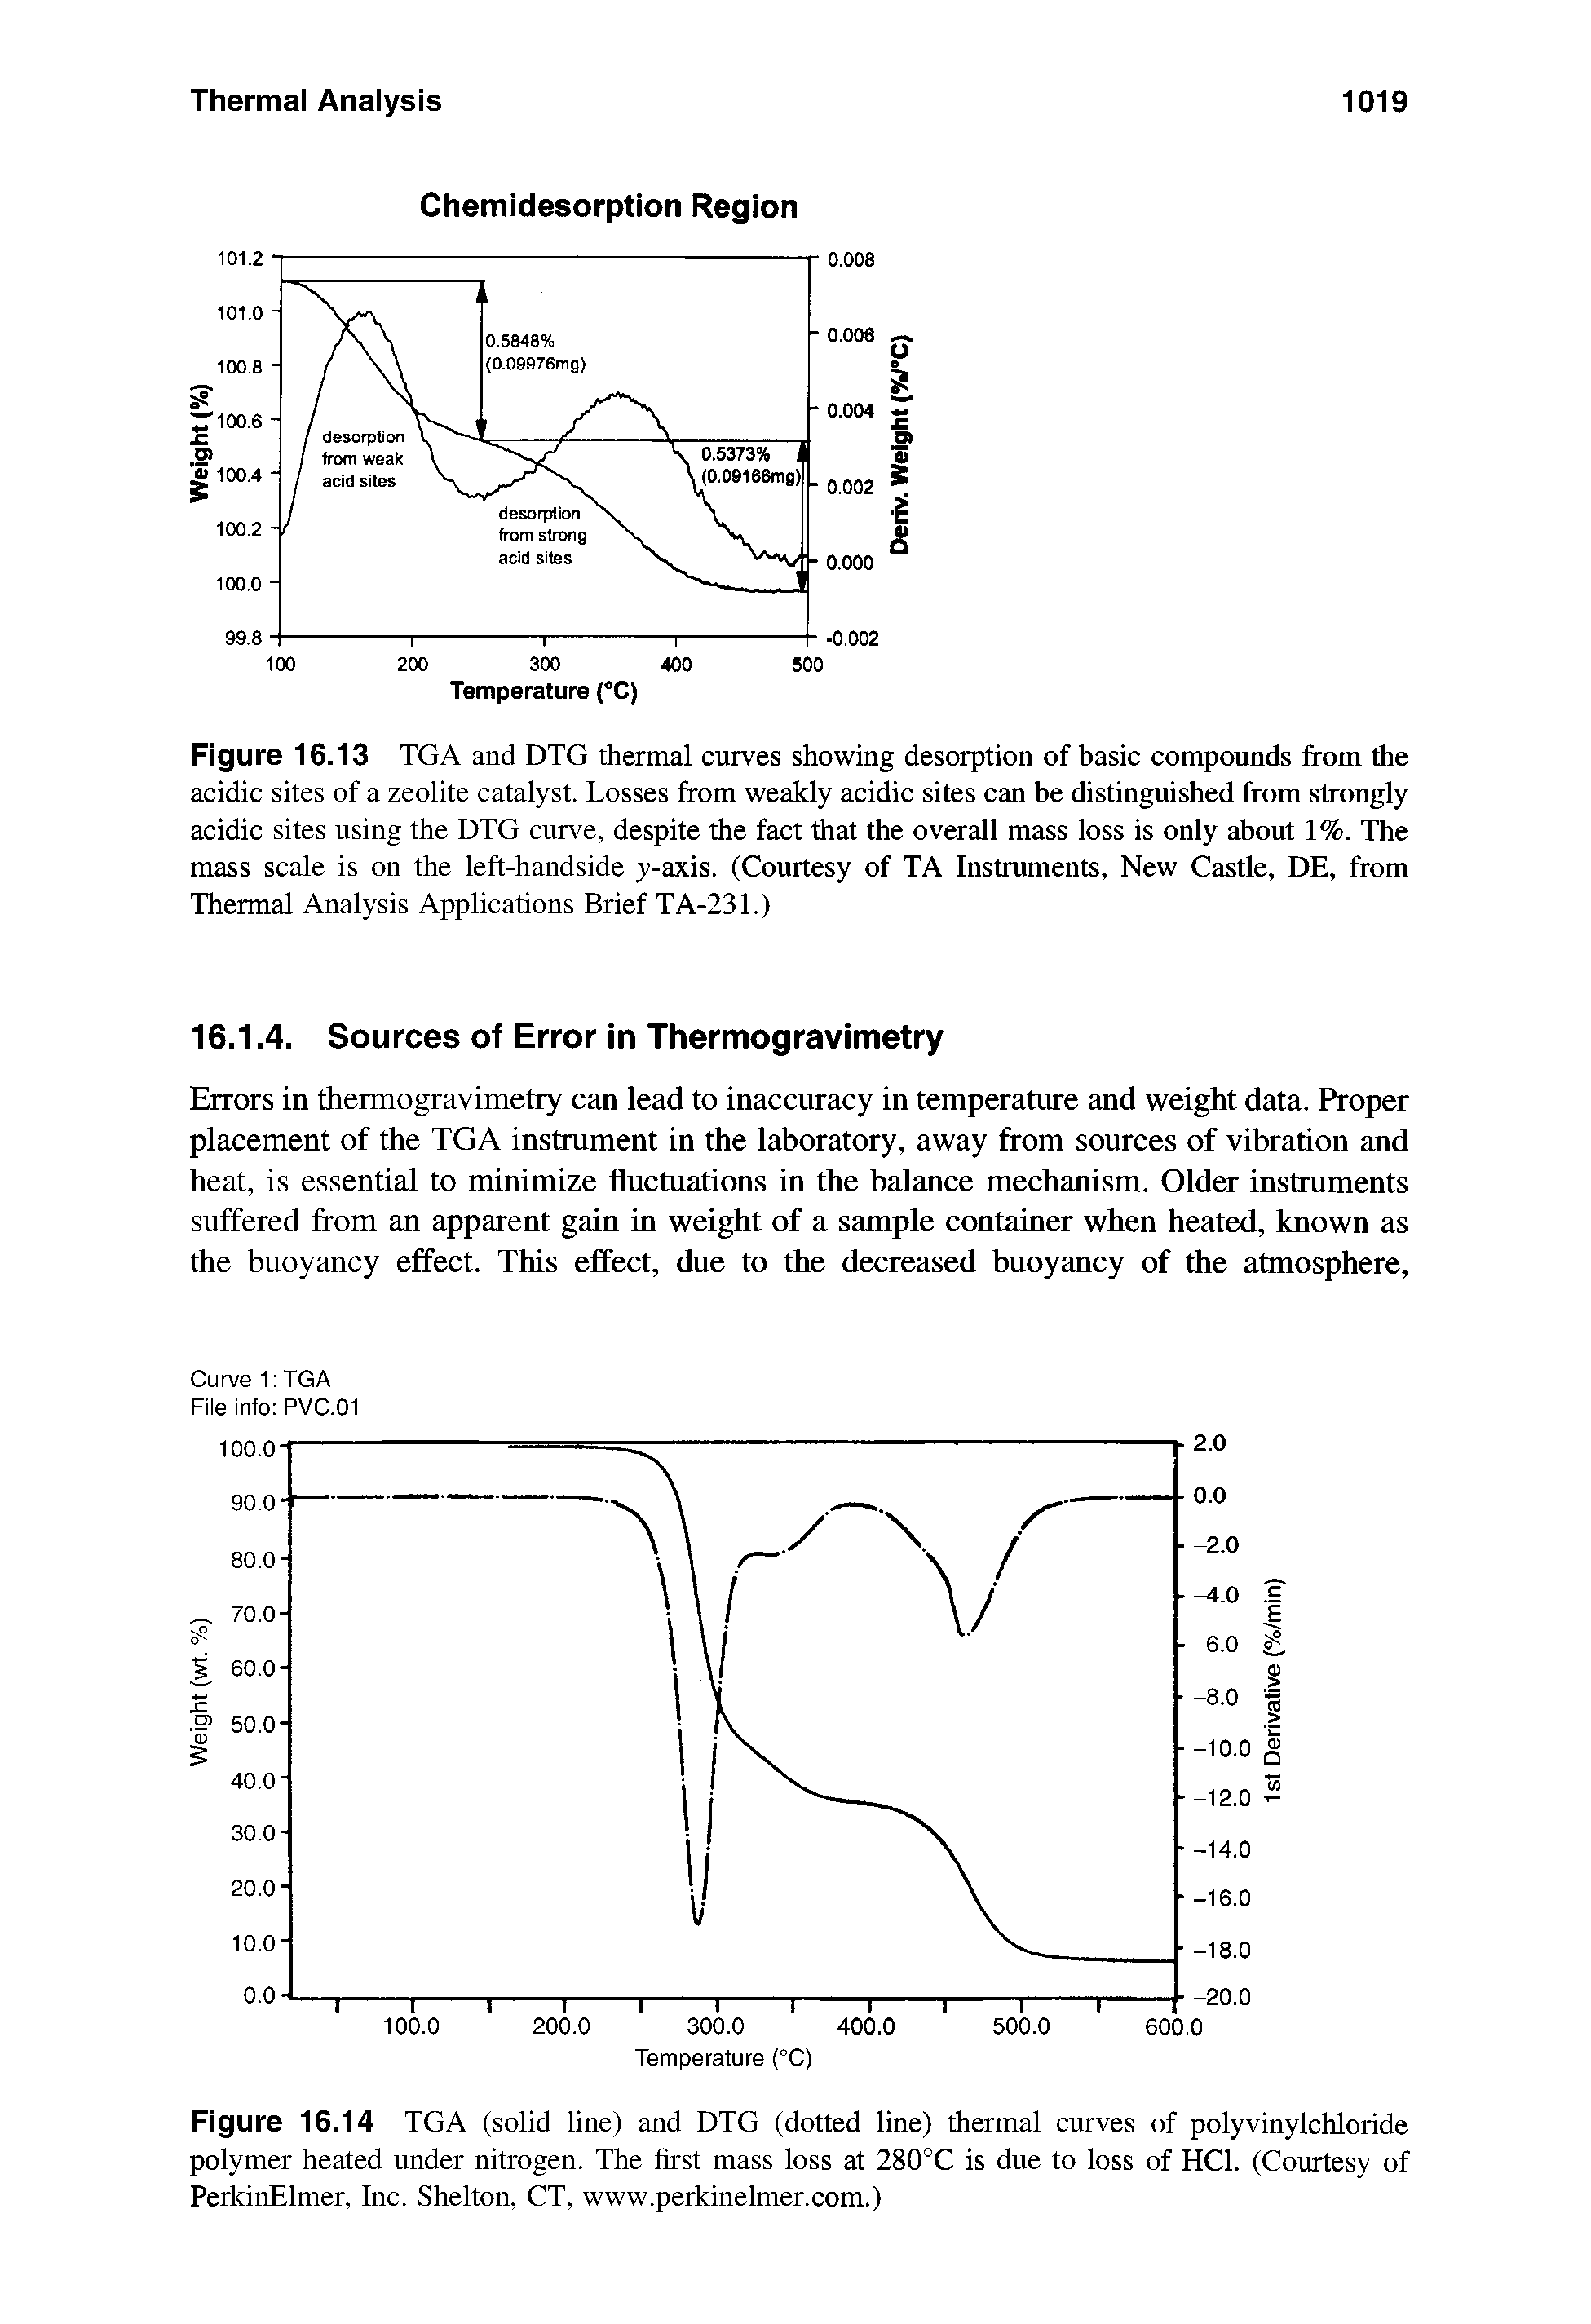 Figure 16.13 TGA and DTG thermal curves showing desorption of basic compounds from the acidic sites of a zeolite catalyst. Losses from weakly acidic sites can be distinguished from strongly acidic sites using the DTG curve, despite the fact that the overall mass loss is only about 1%. The mass scale is on the left-handside y-axis. (Courtesy of TA Instruments, New Castle, DE, from Thermal Analysis Applications Brief TA-231.)...